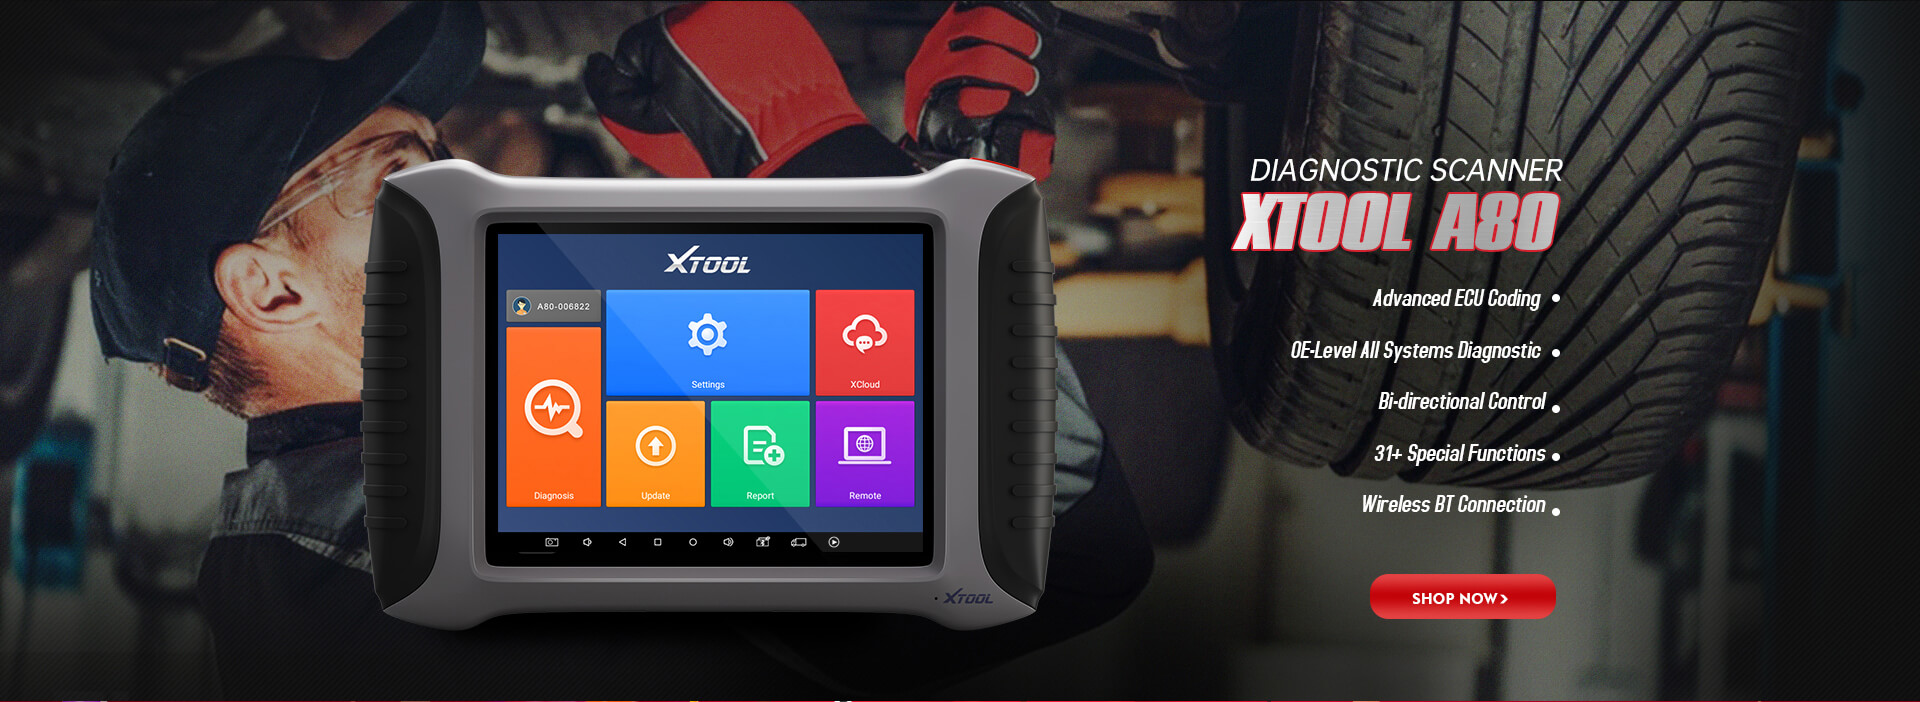 XTool A80 Diagnostic Scanner